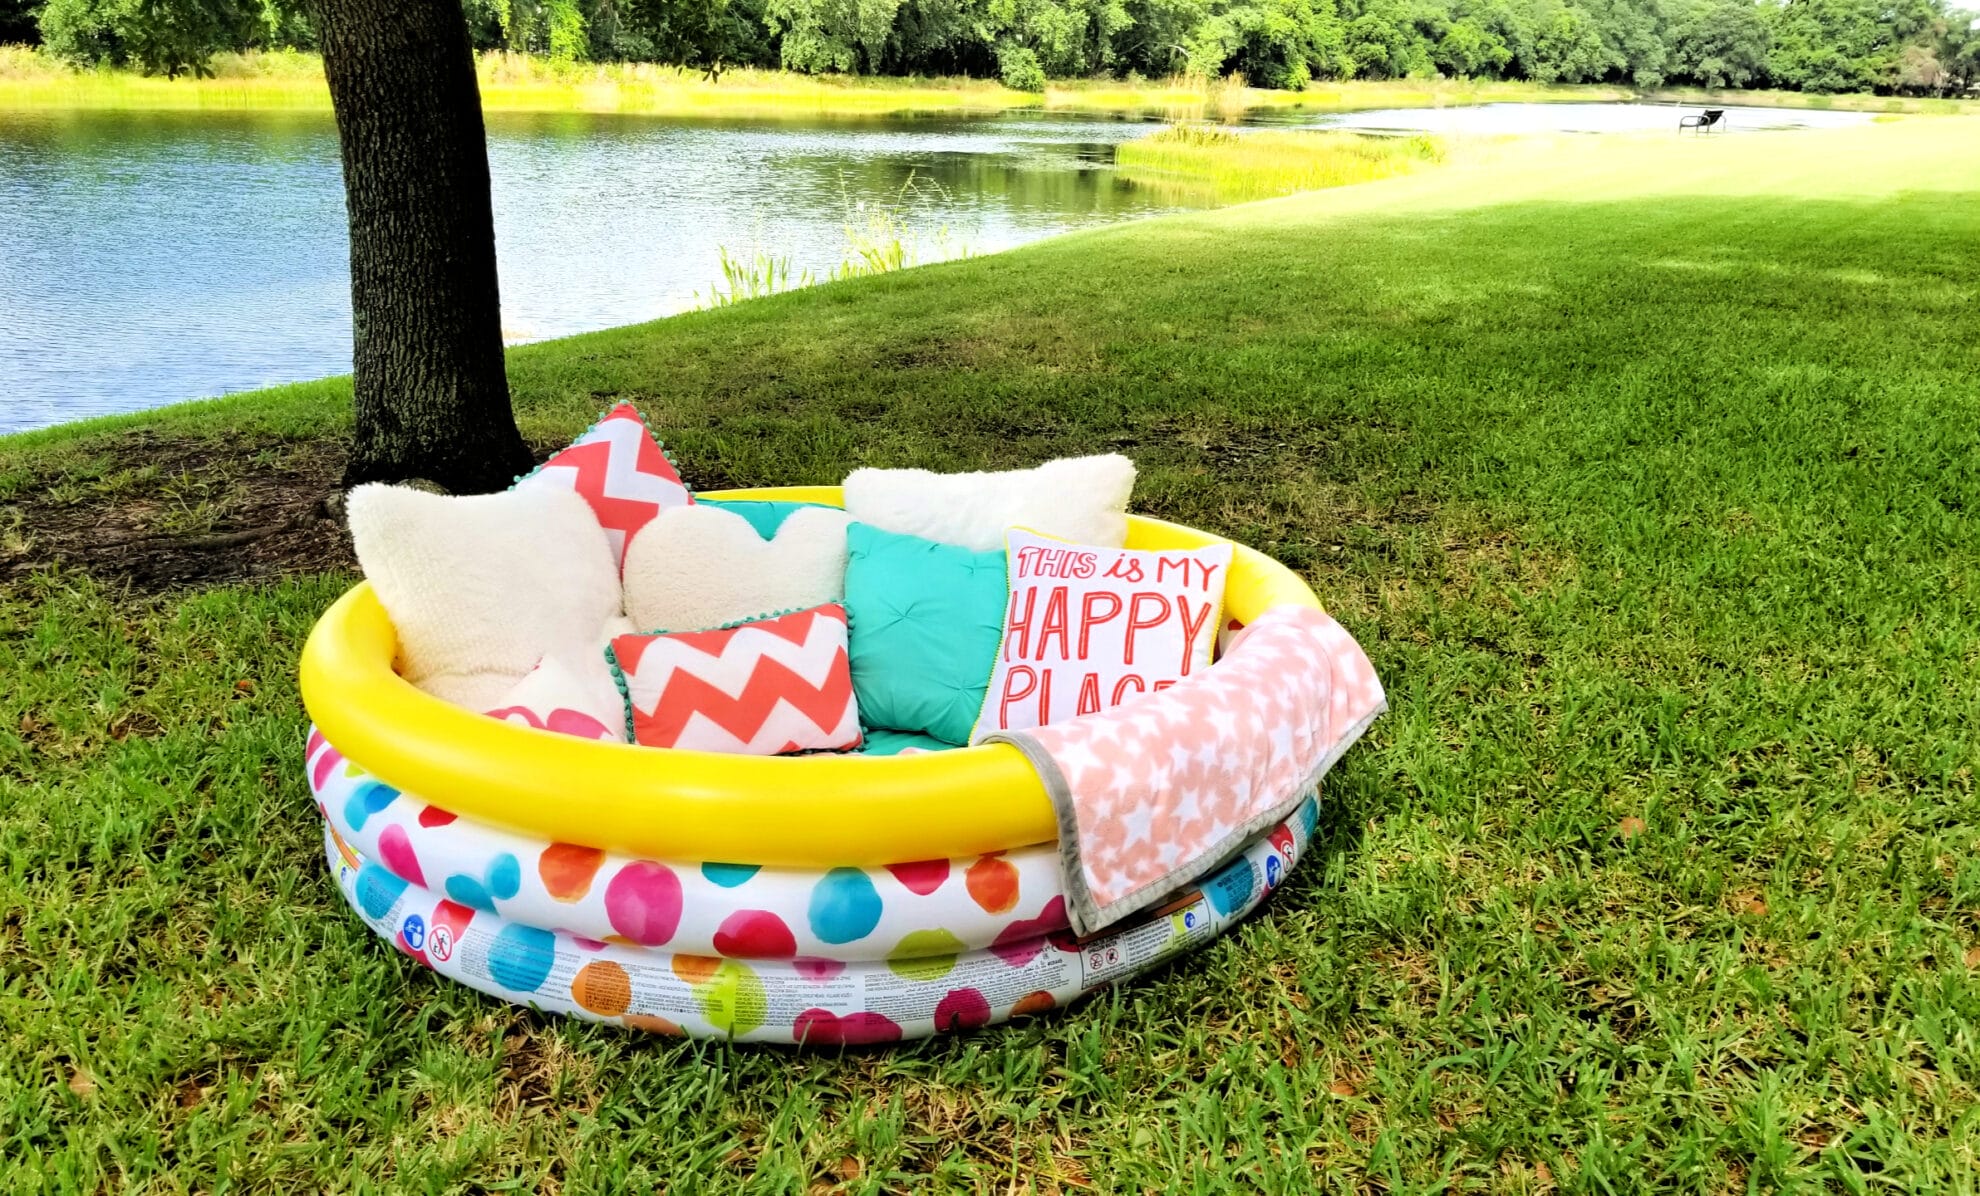 There's nothing dreamier than spending the summer outdoors with a good book. This DIY outdoor reading nook comes together easily with a kiddie pool, some blankets and pillows. It's a perfect, comfy reading fort where kids can read the Percy Jackson & the Olympians series.